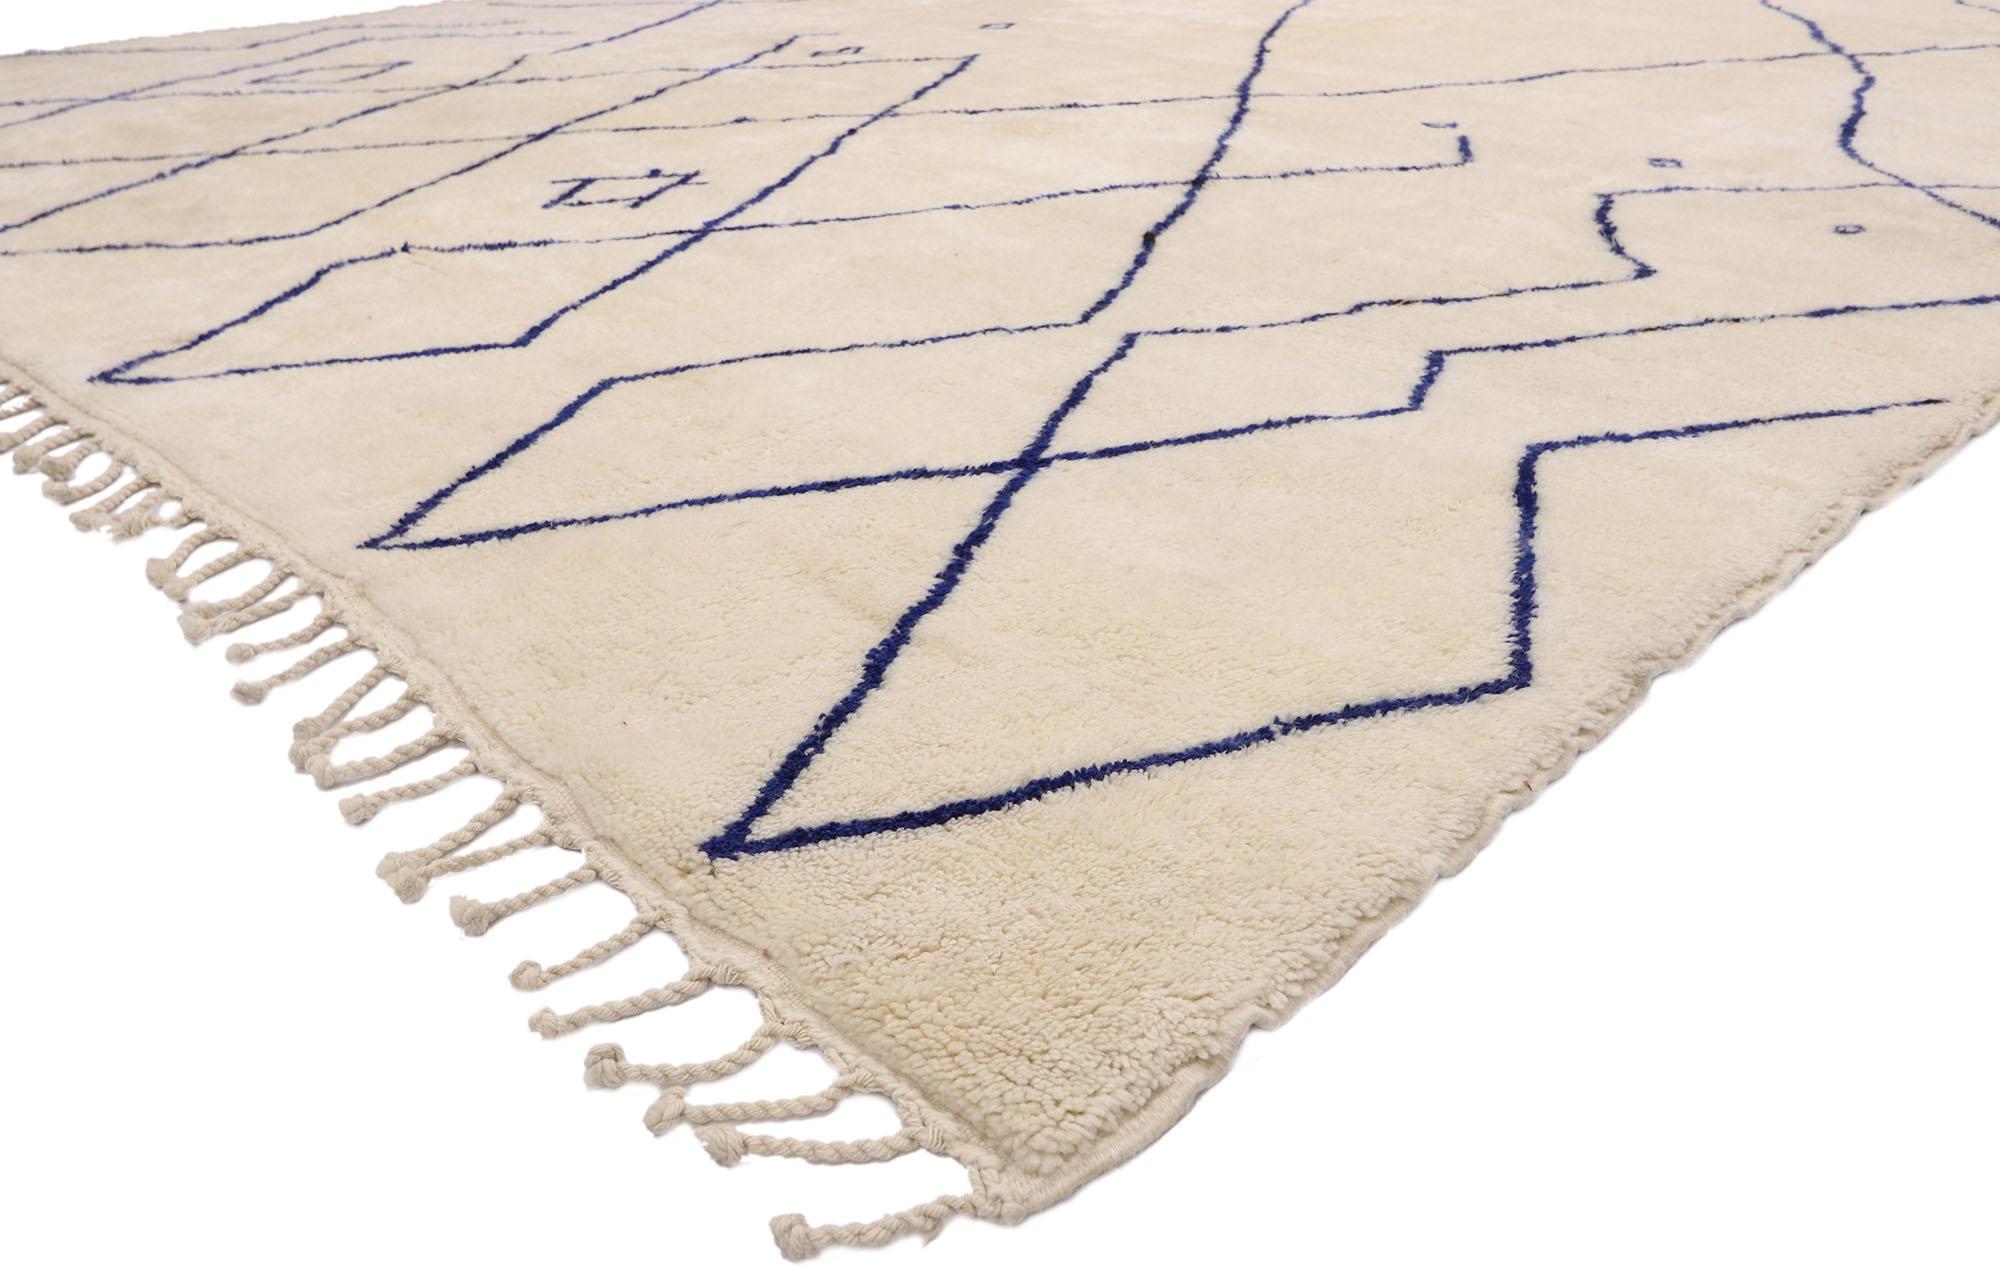 21085 new contemporary Moroccan rug with Cozy Bohemian style and Hygge Vibes. With its simplicity, plush pile and Hygge vibes, this hand knotted wool contemporary Moroccan area rug provides a feeling of cozy contentment. It features dark royal blue